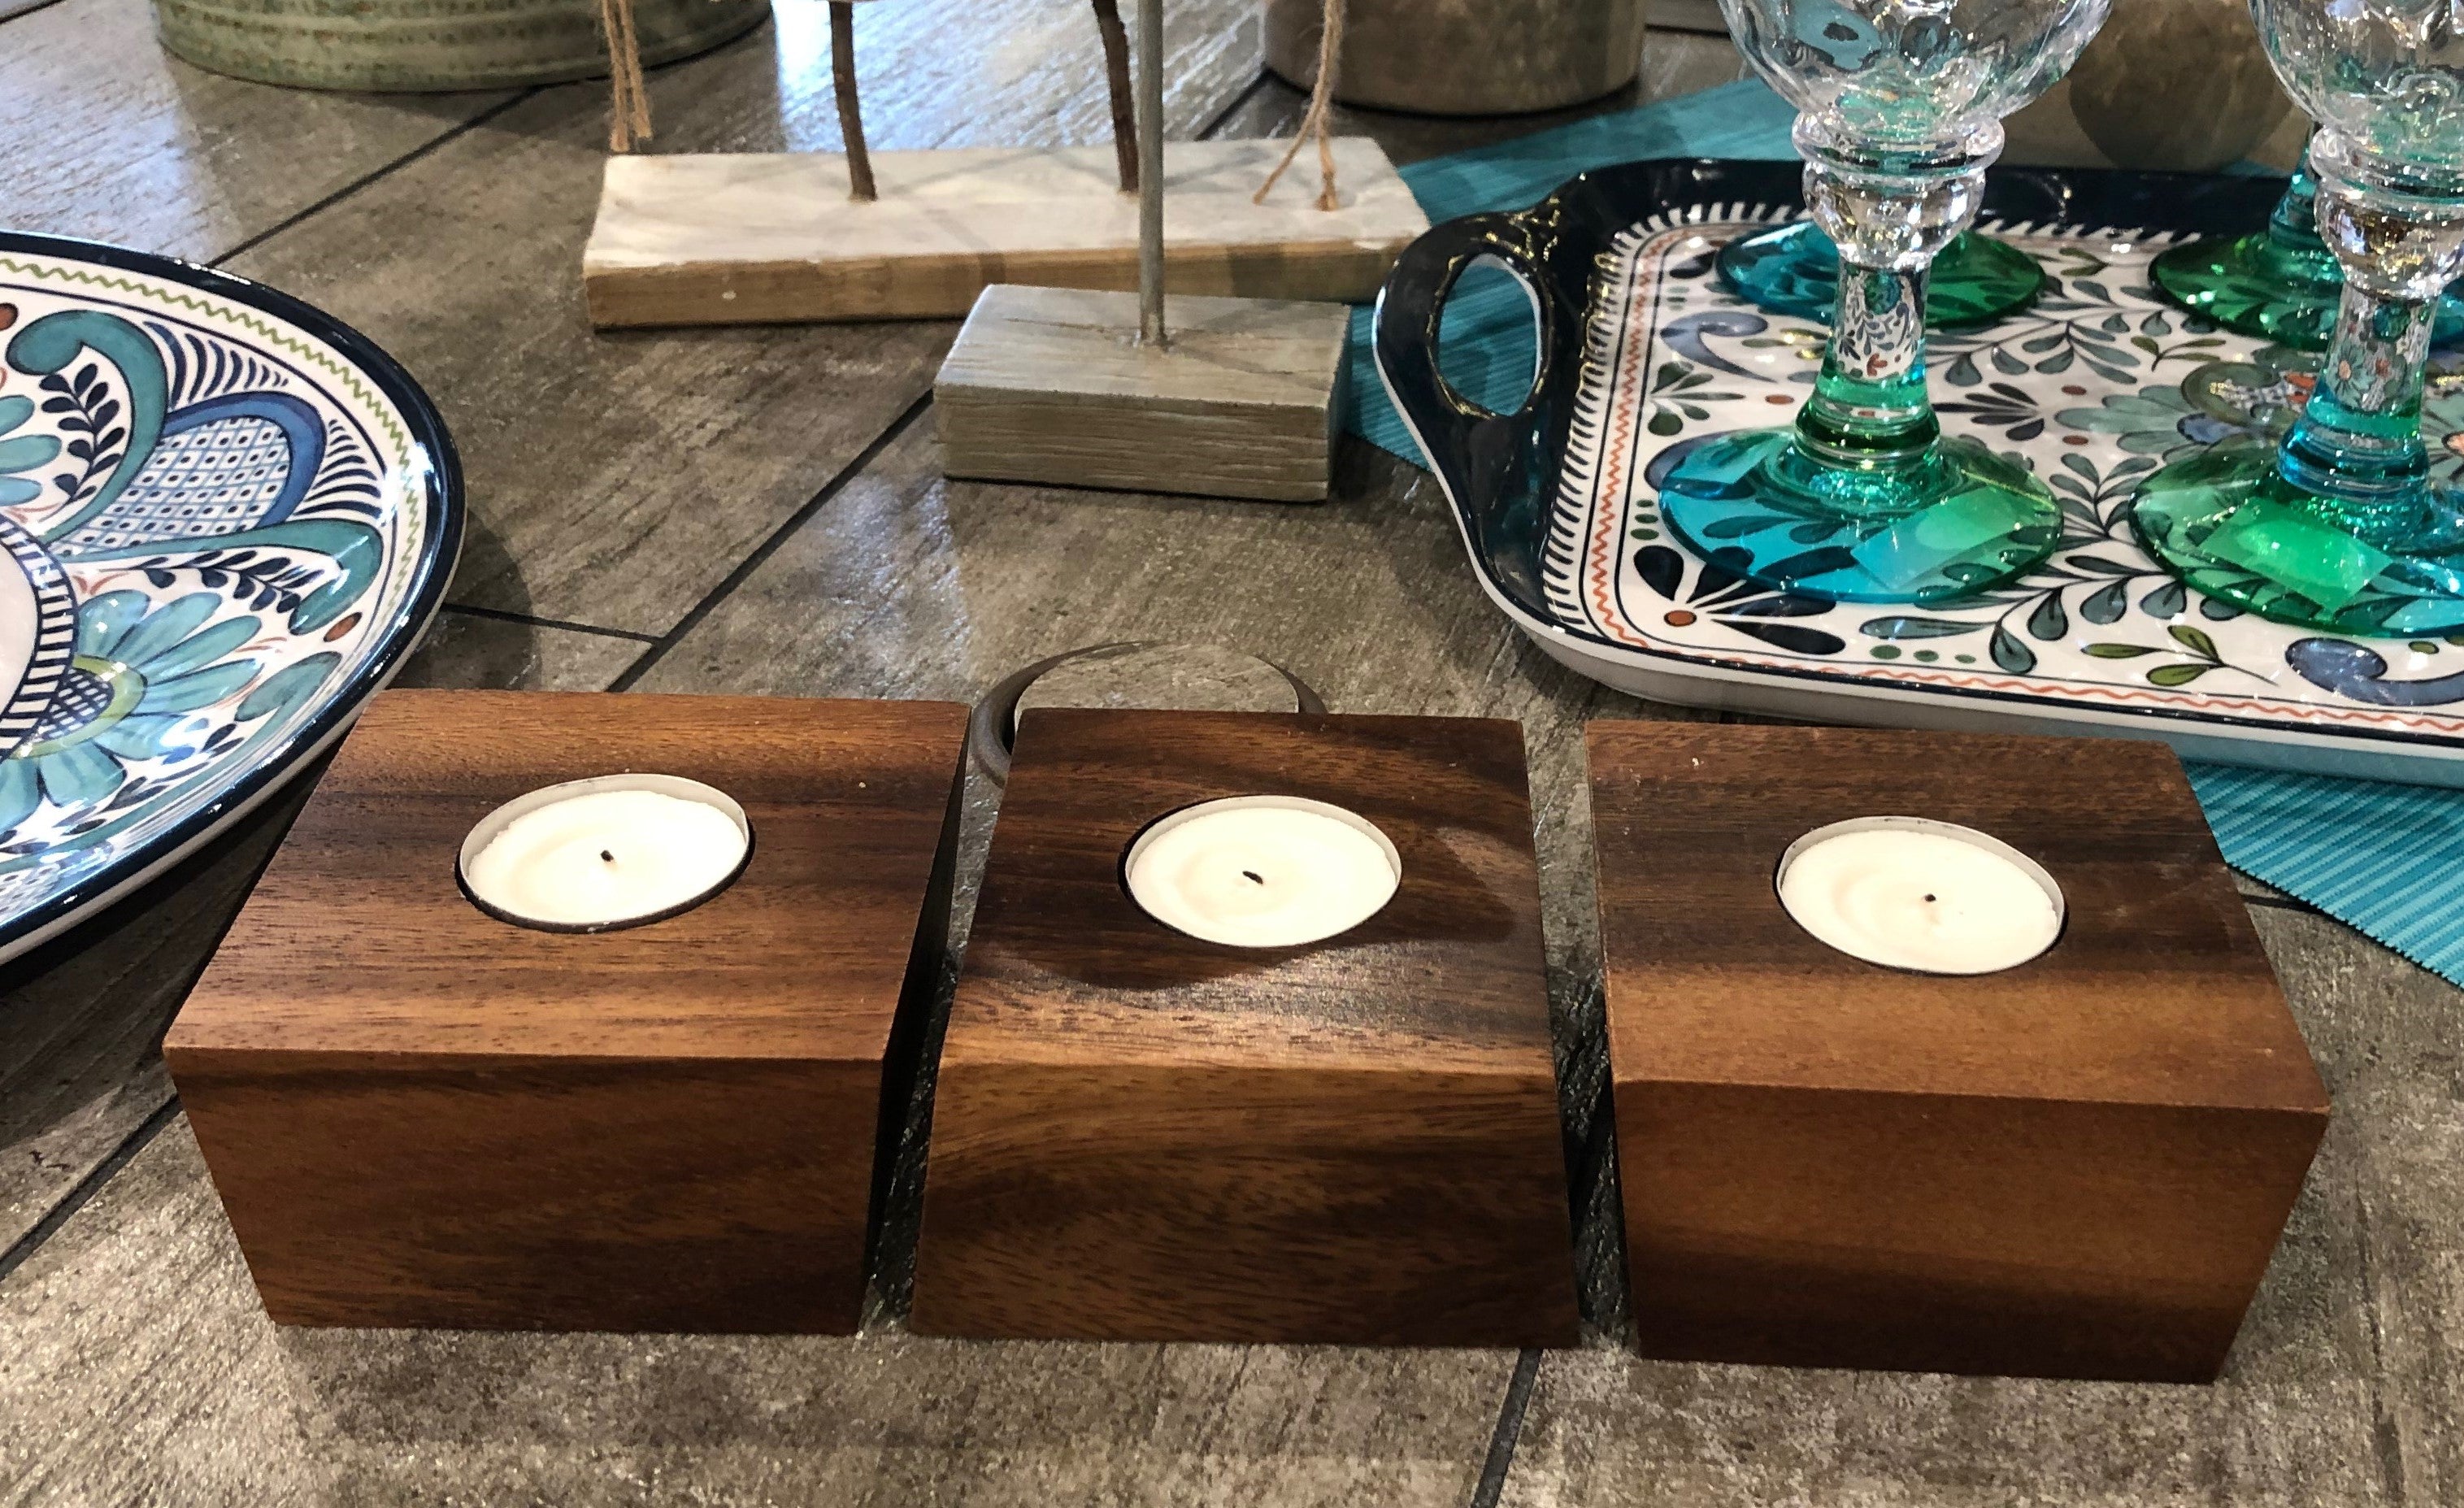 Three Candleholder with Tealights